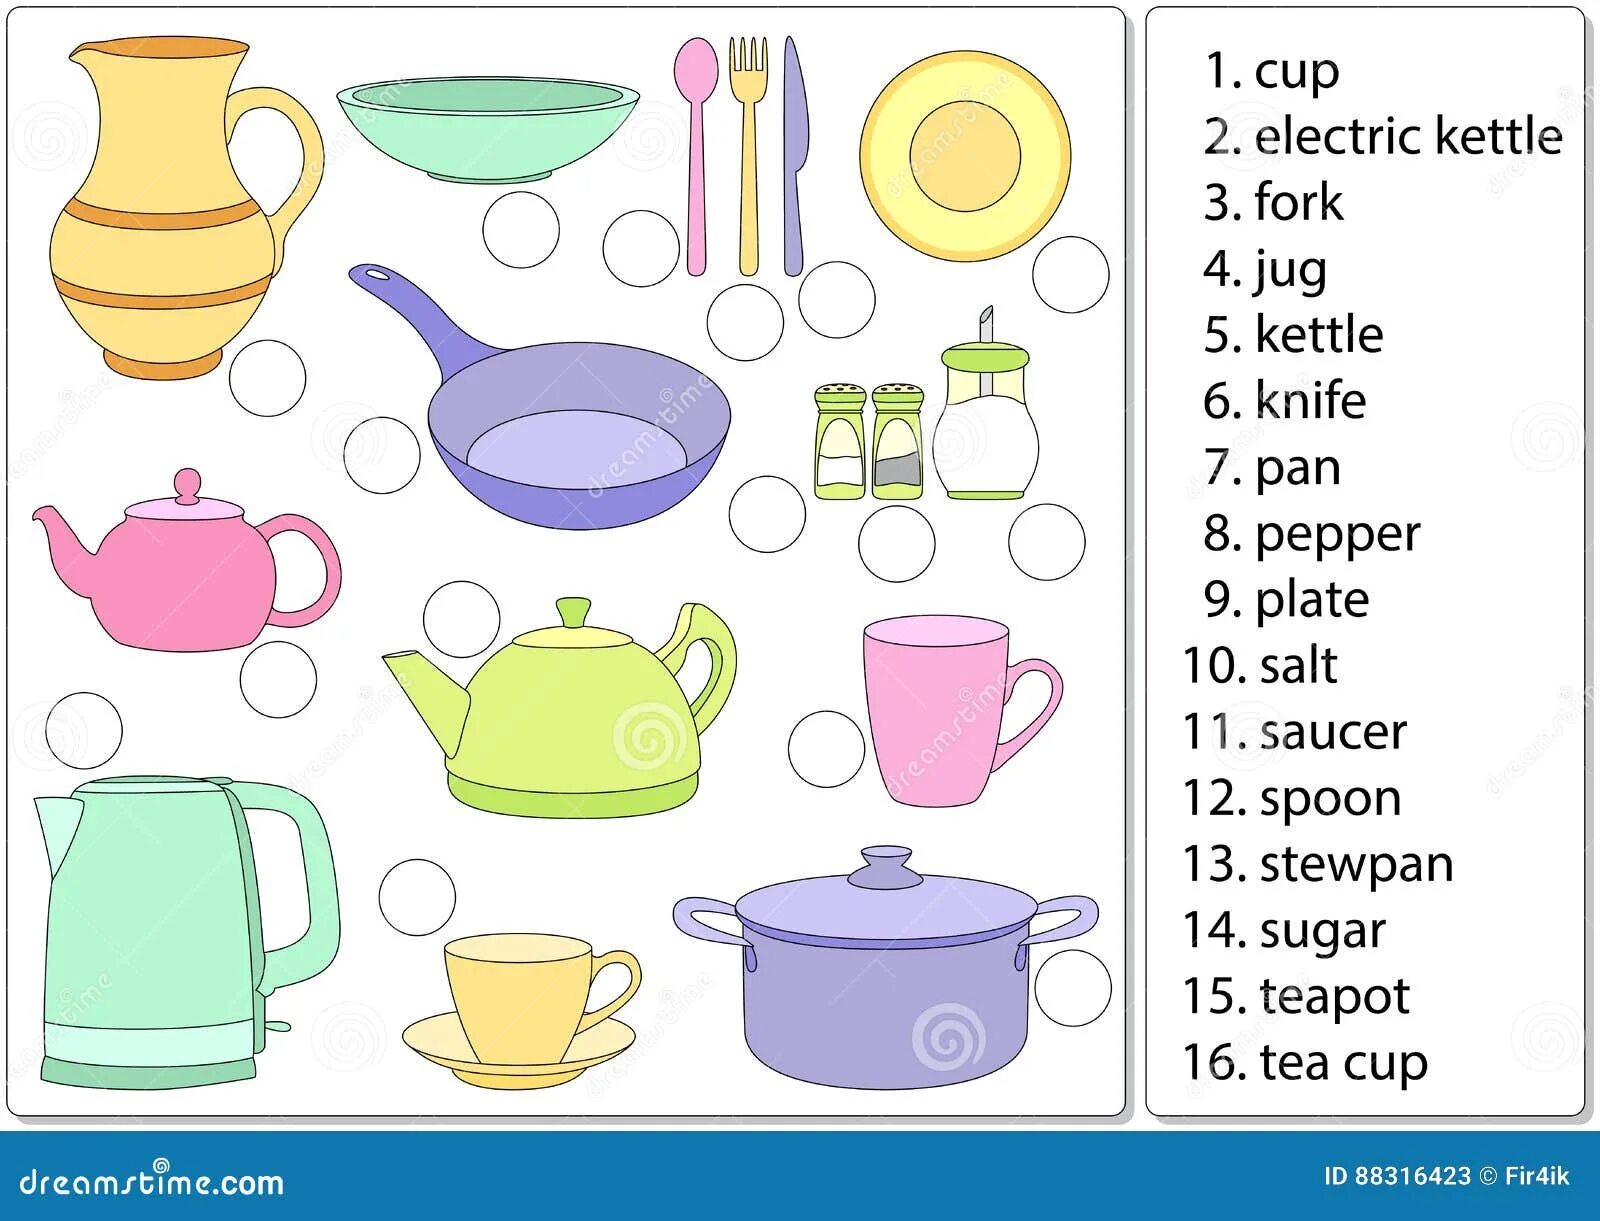 Посуда Worksheets for Kids. Посуда по англ. Tableware for Kids. Tableware for Kids in Worksheets. Cups pdf